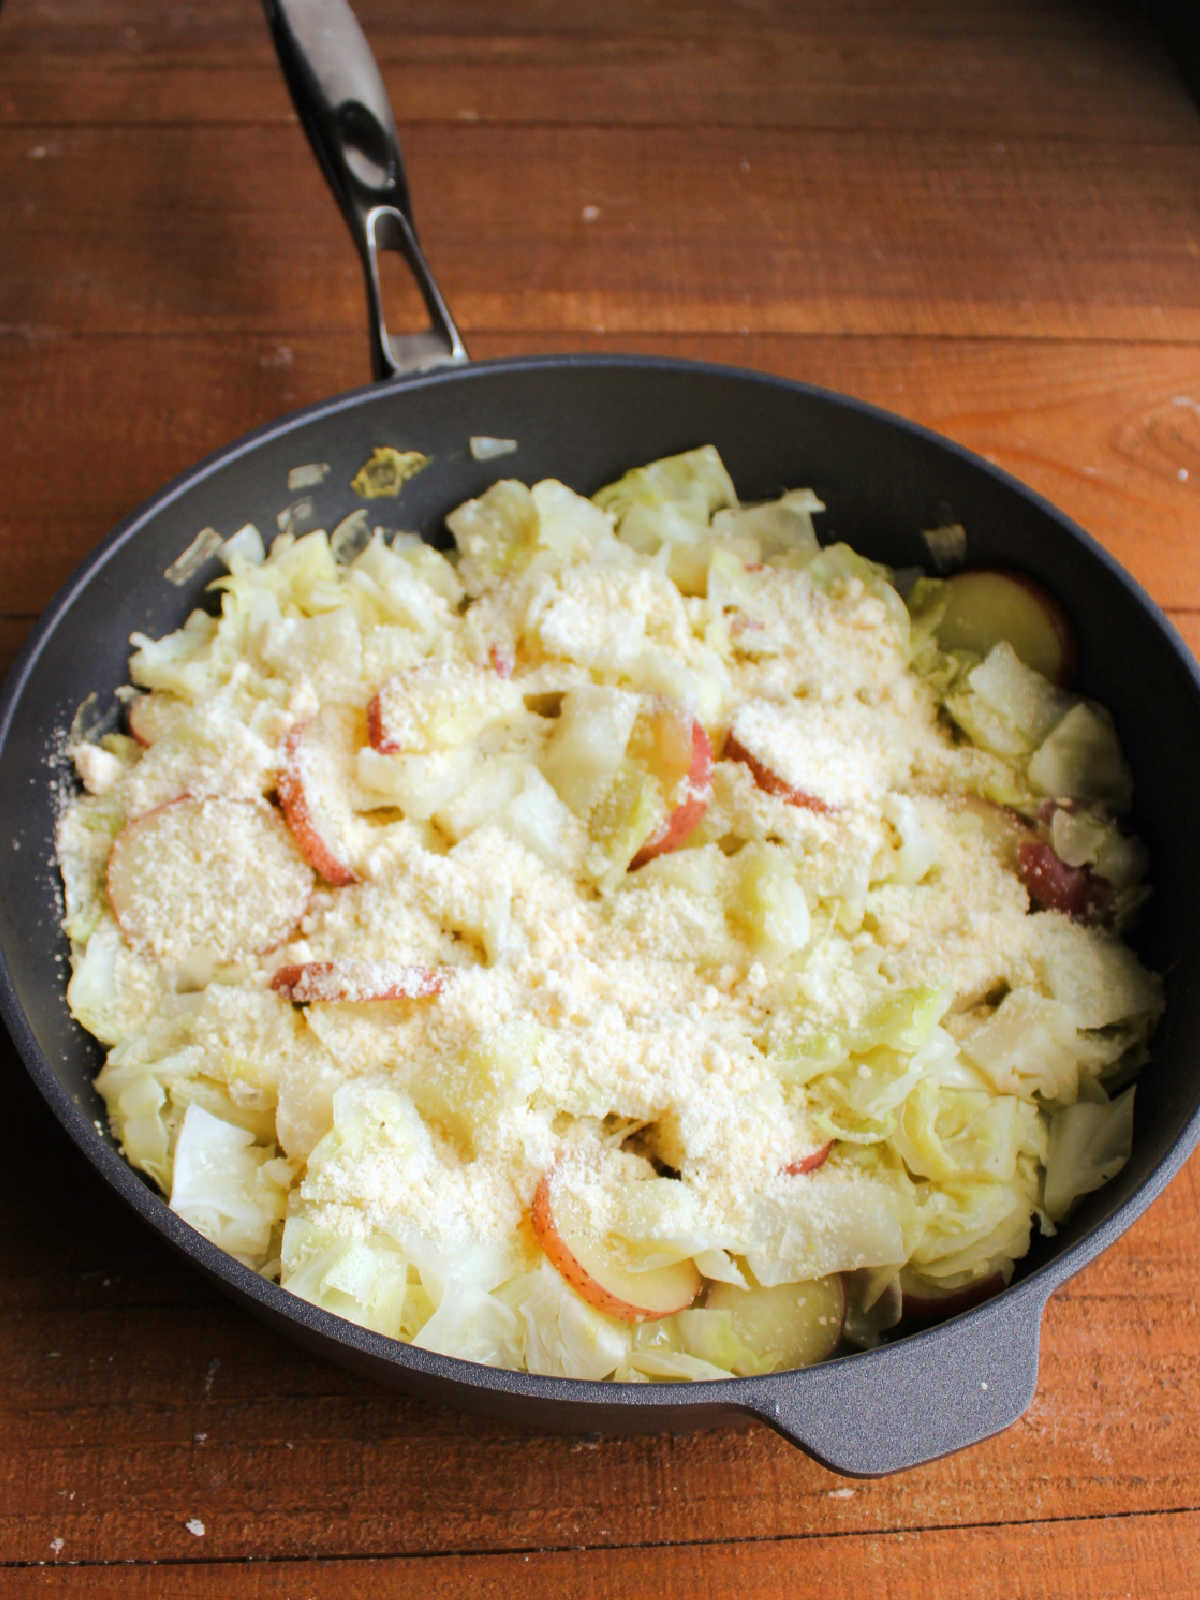 Skillet filled with cooked cabbage and potatoes topped with grated Parmesan cheese.